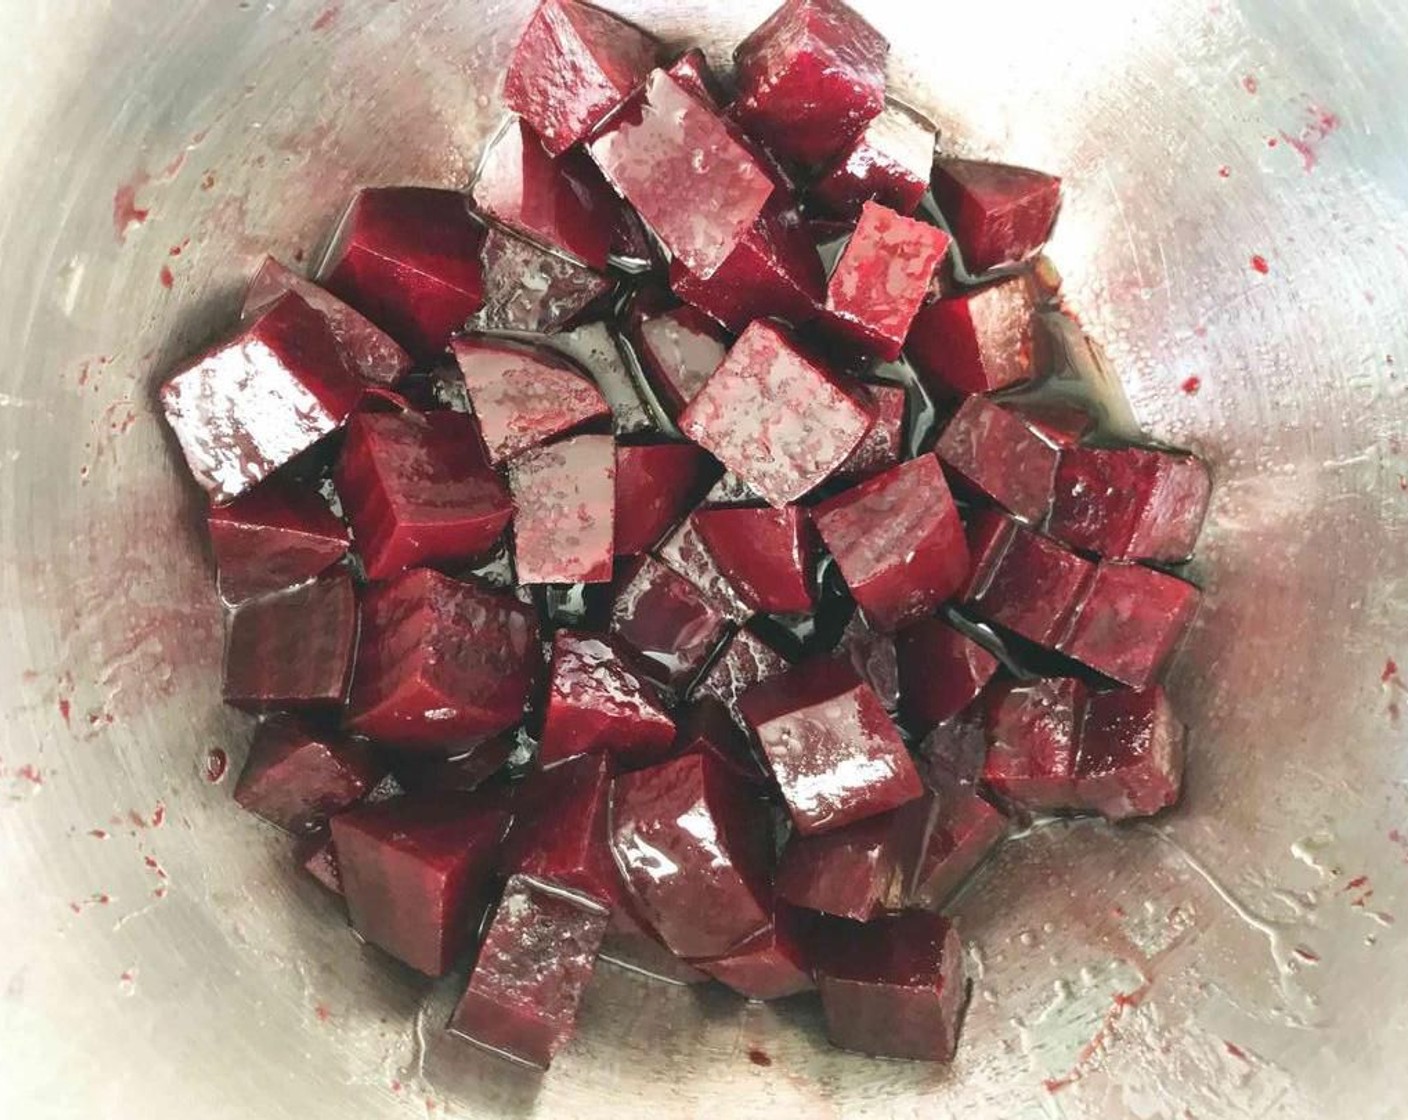 step 1 Place the Beets (1 1/2), Balsamic Vinegar (1 1/2 Tbsp), and Extra-Virgin Olive Oil (1 Tbsp) in a medium bowl and stir to coat. Season with Salt (to taste) and Ground Black Pepper (to taste), cover, and place in the fridge for at least an hour to marinate.